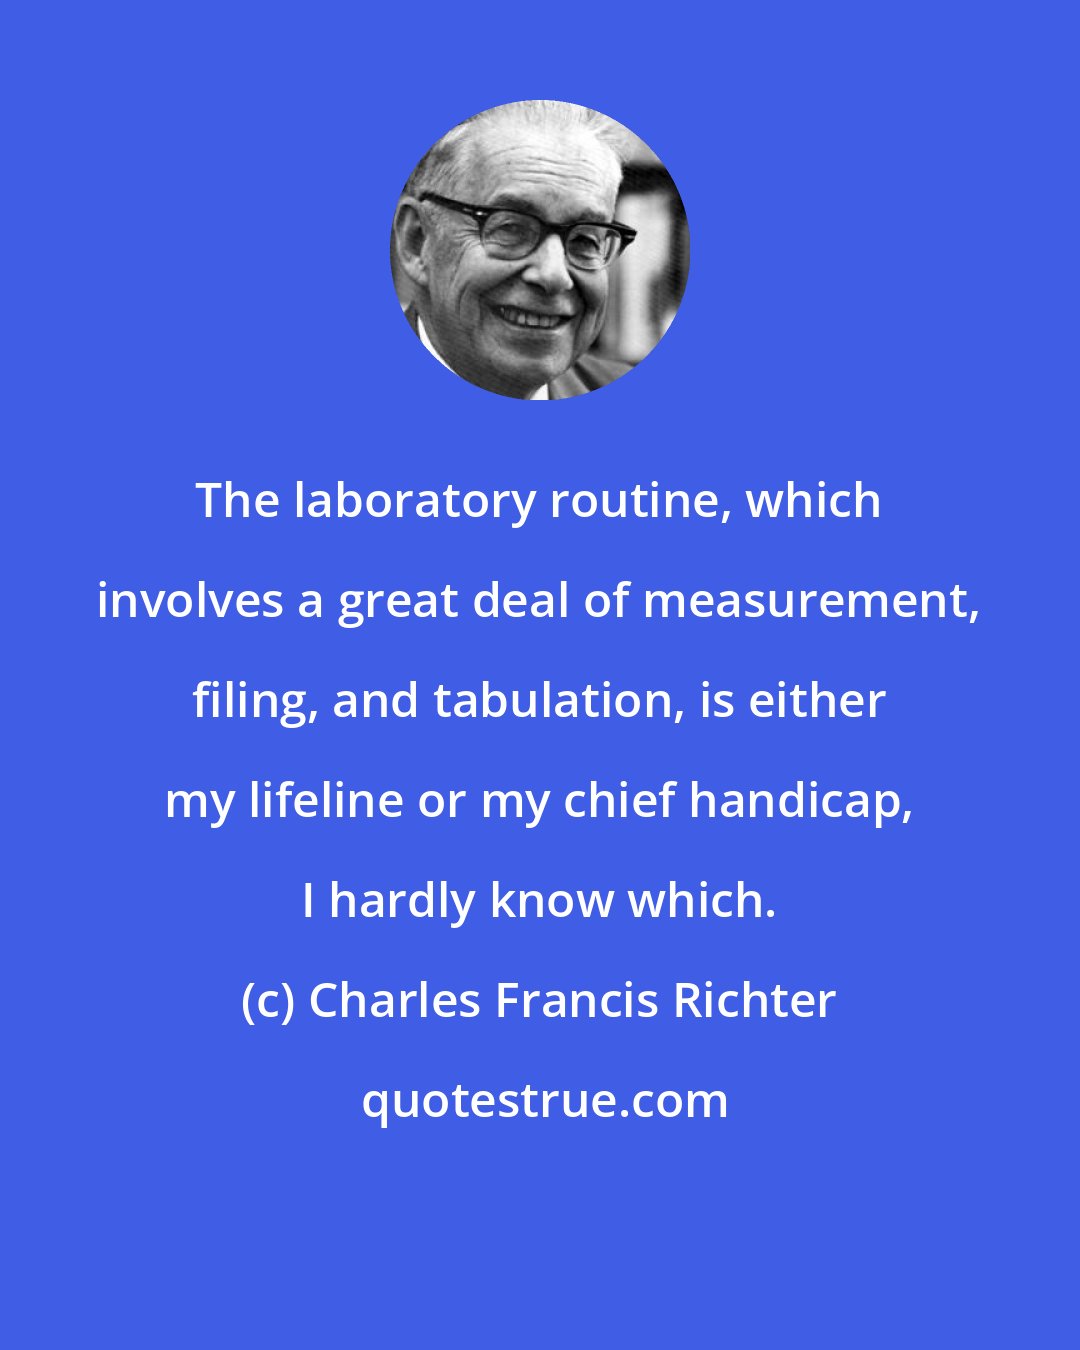 Charles Francis Richter: The laboratory routine, which involves a great deal of measurement, filing, and tabulation, is either my lifeline or my chief handicap, I hardly know which.